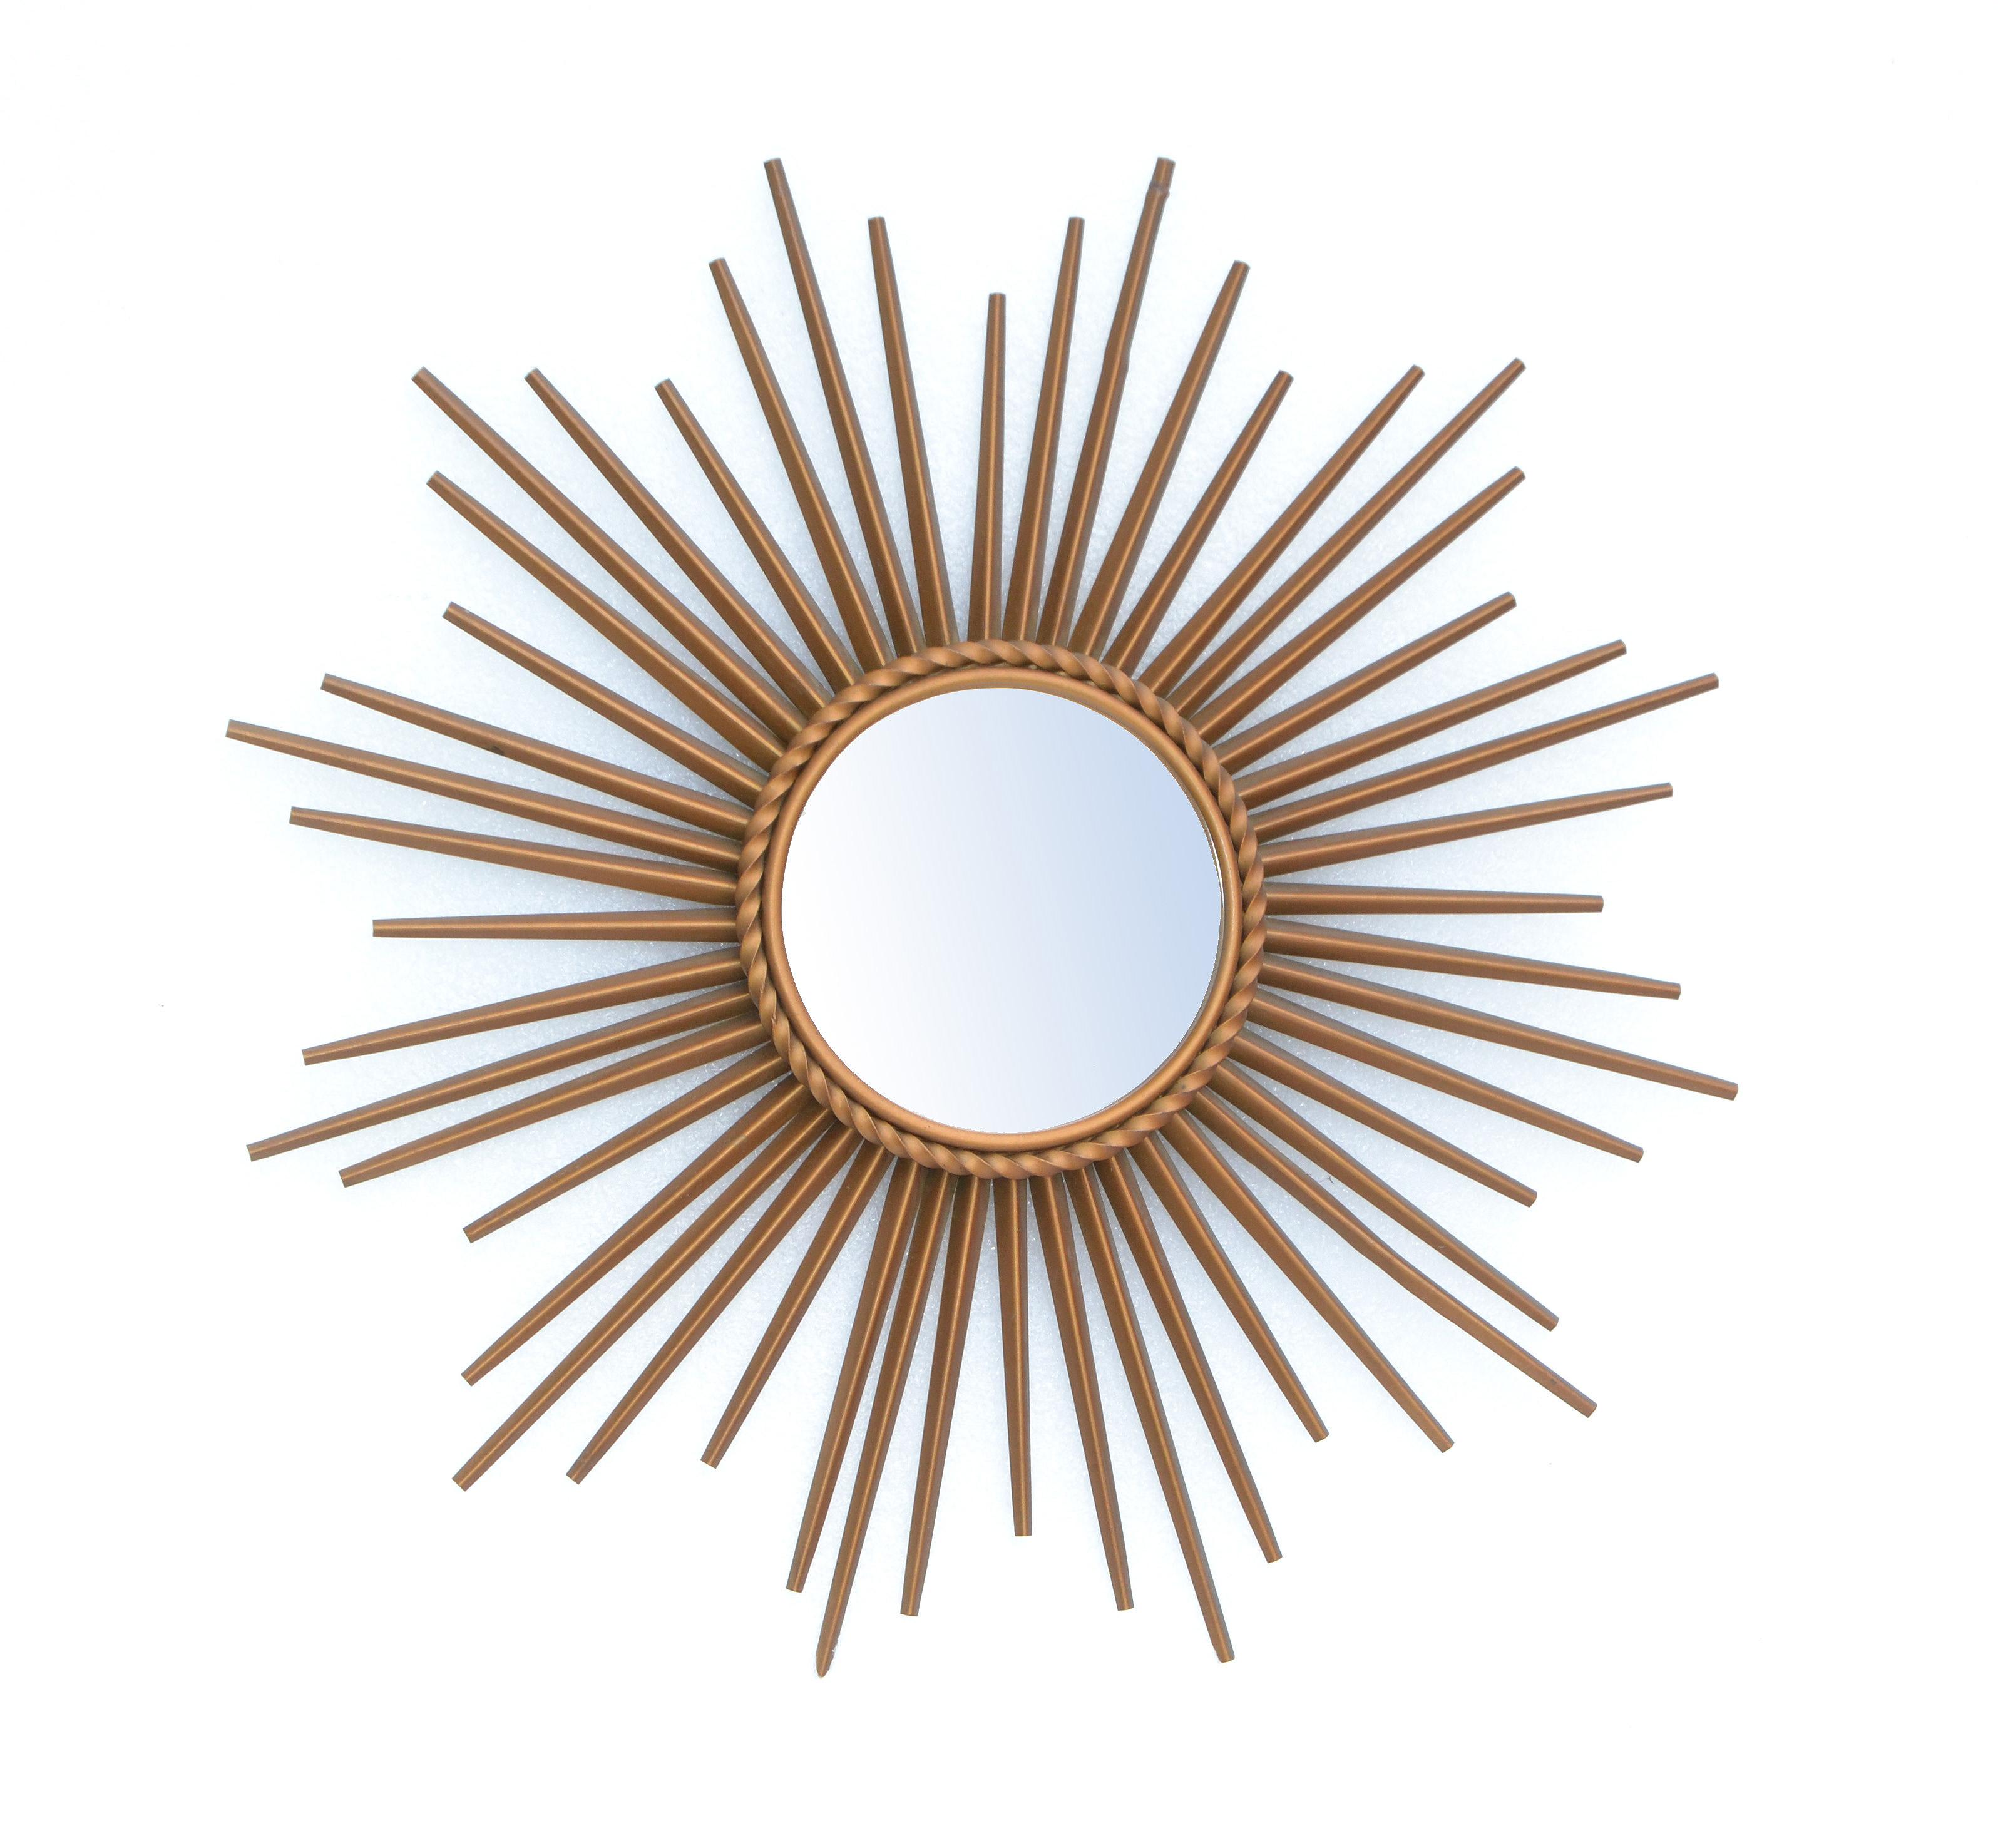 Signed Chaty Vallauris France Gold Finish Iron Sunburst Mirror Wall Mirror, 1970 For Sale 5